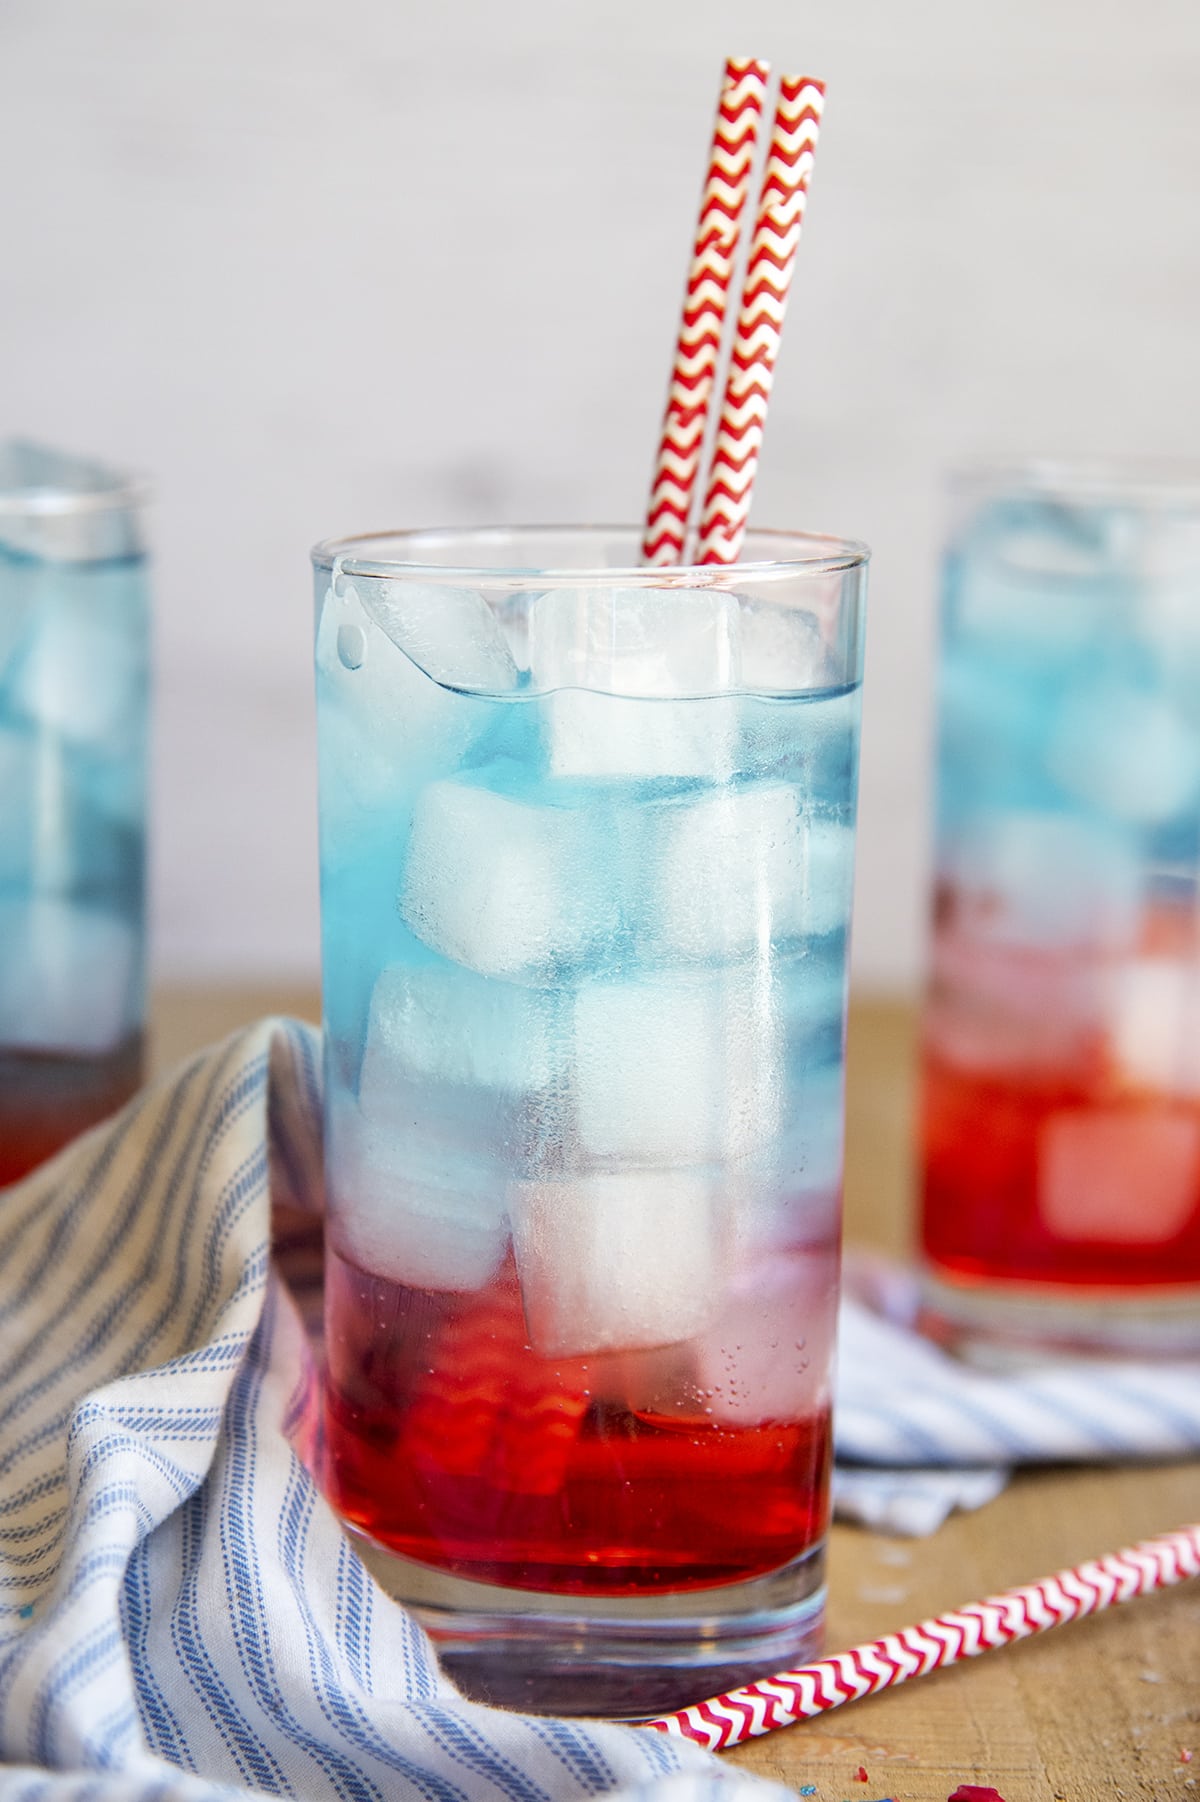 A glass cup full of a red drink on bottom, blue drink on top, and ice throughout the glass.